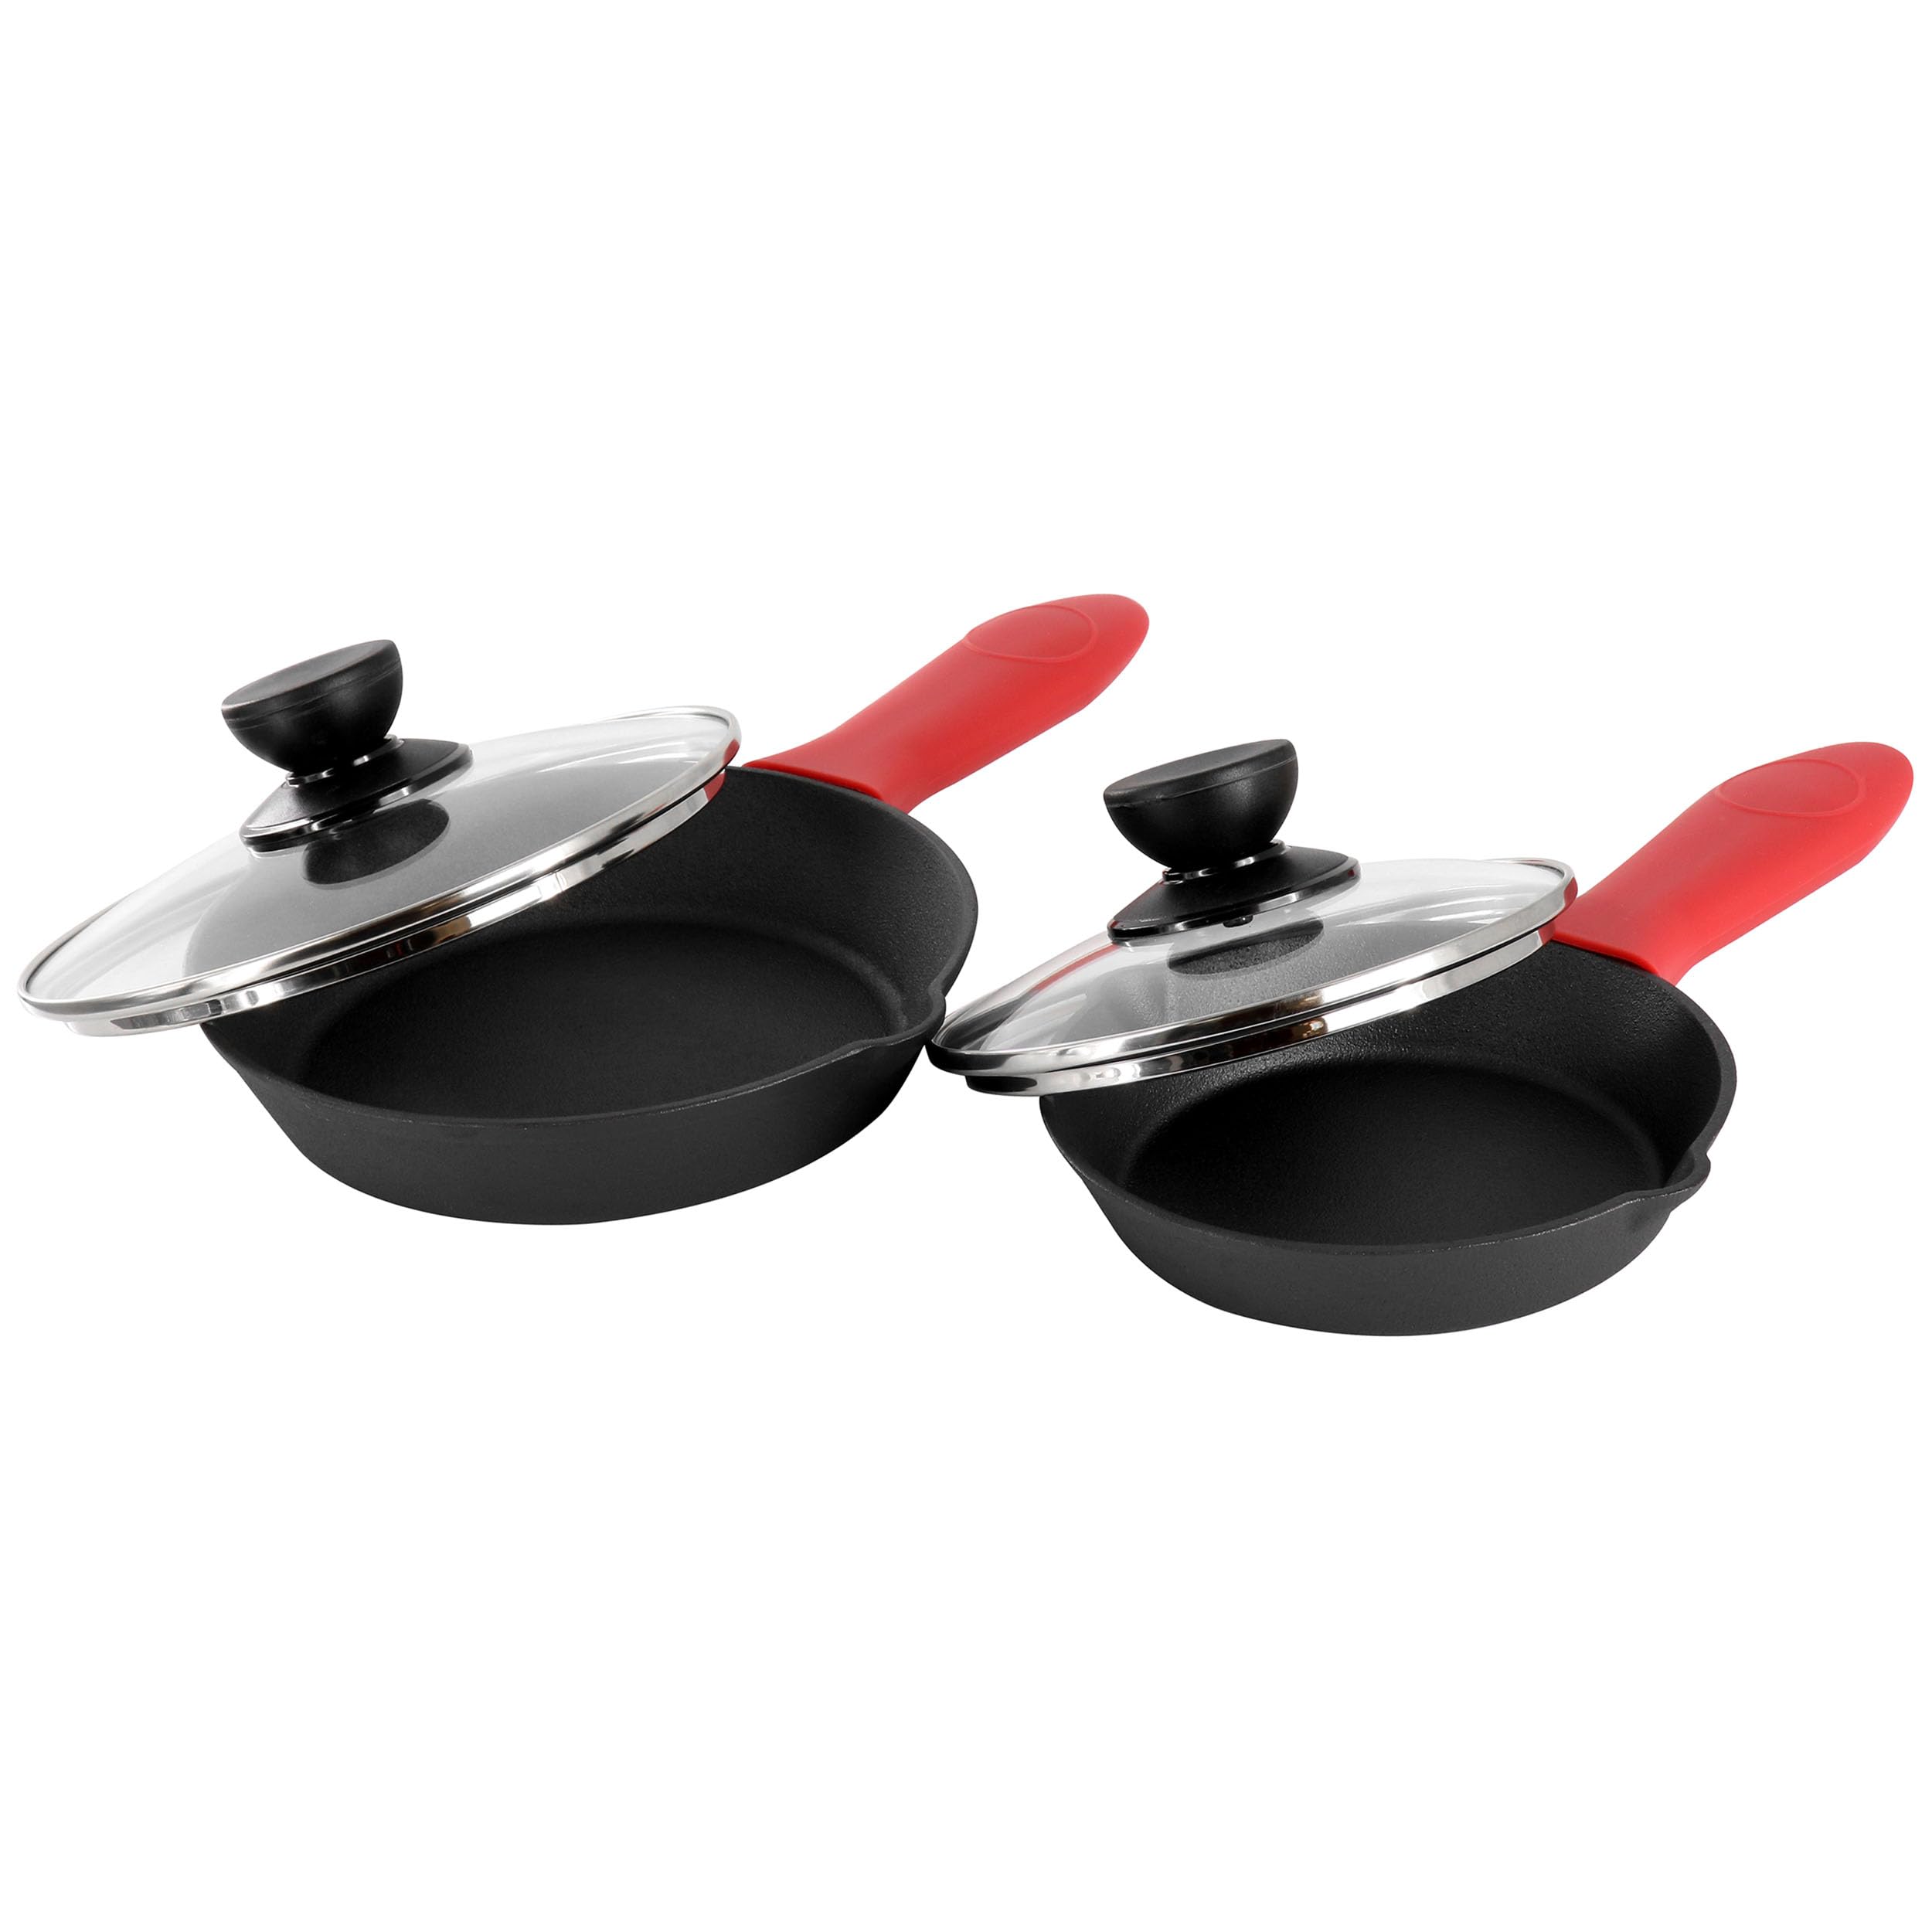 Megachef 13 Piece Pre-Seasoned Cast Iron Skillet Set with Temperd Glass Lids and Silicone Holders